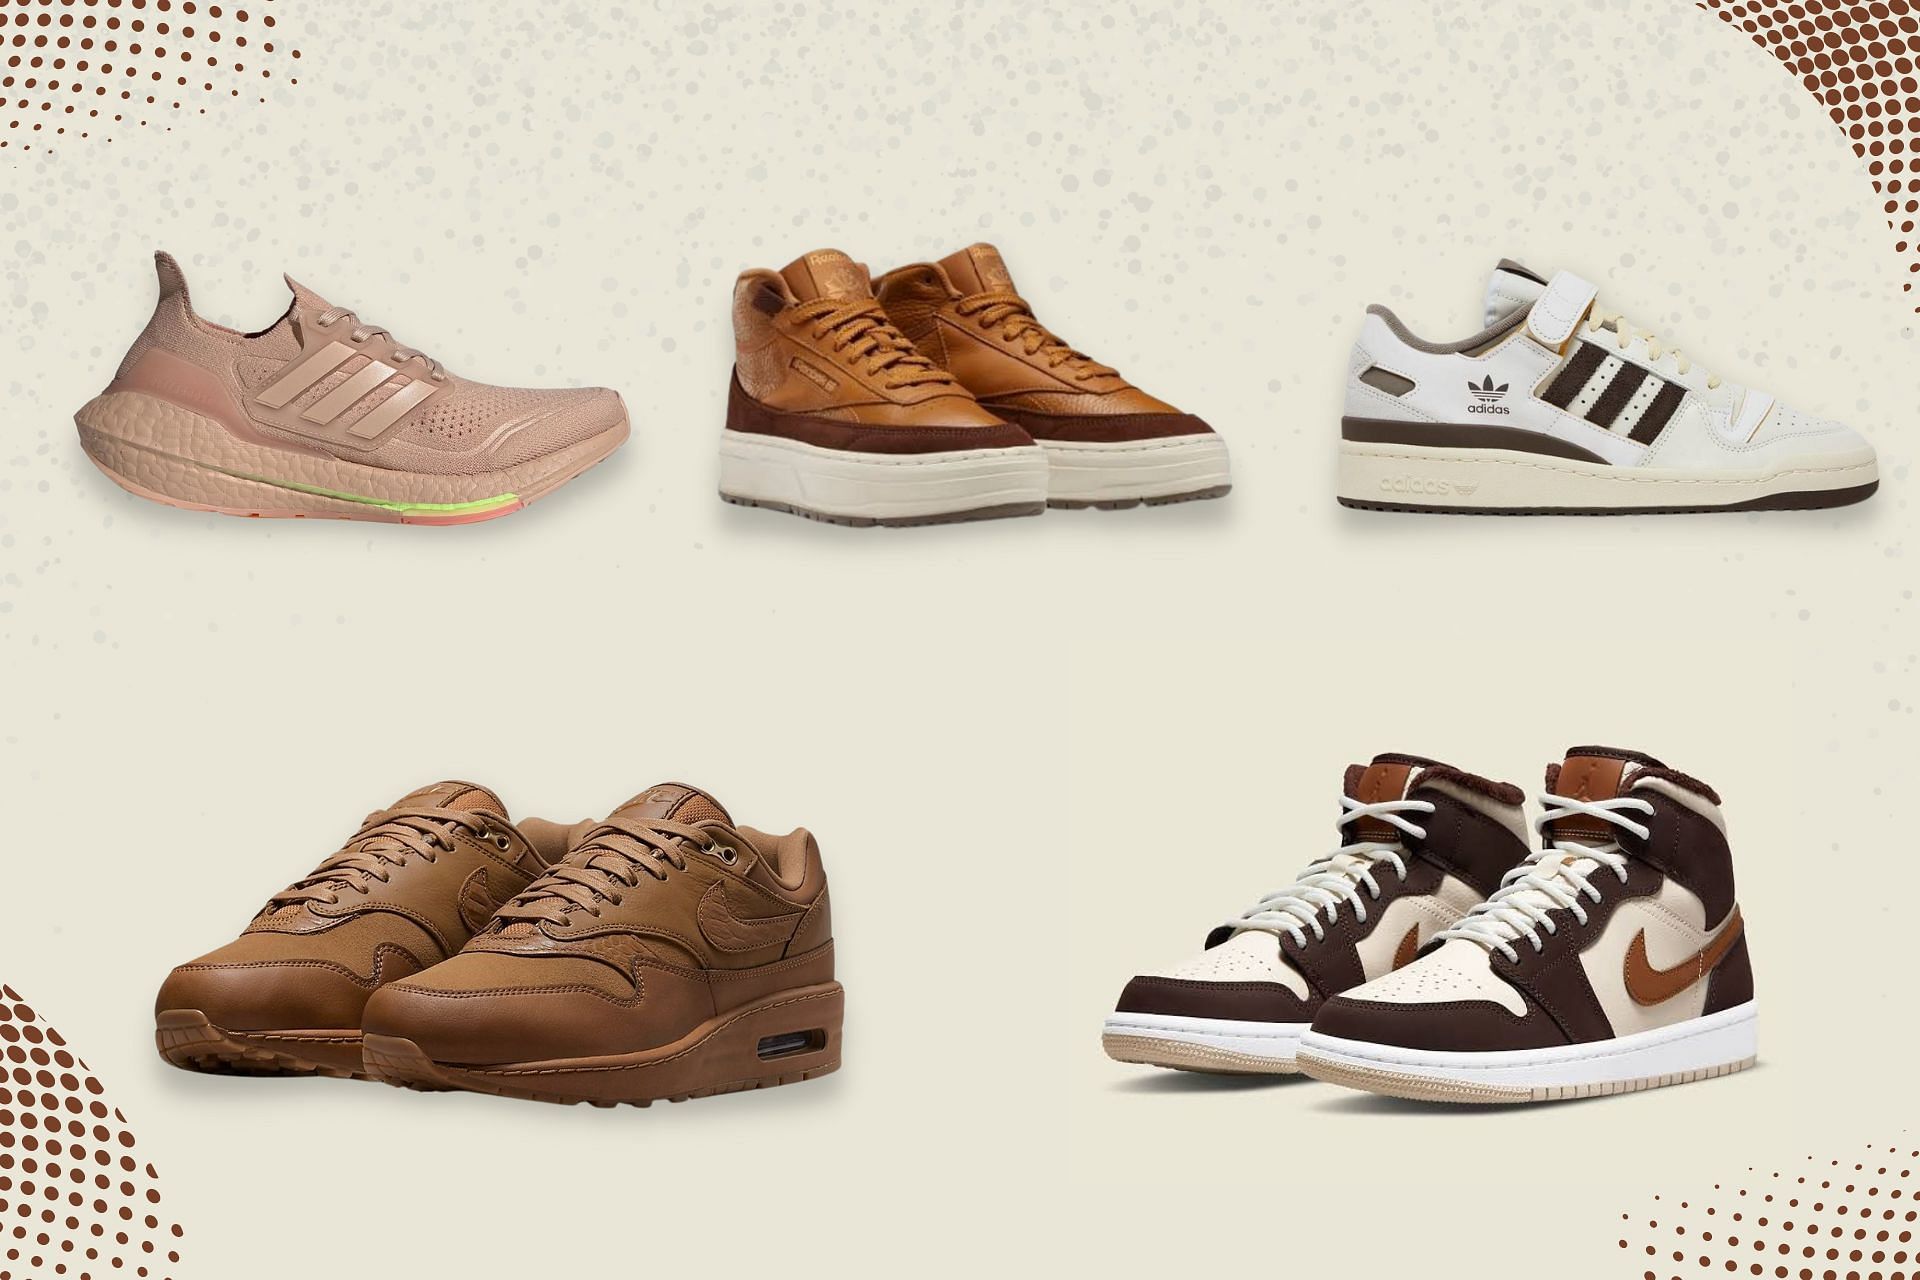 The 5 best brown women's sneakers one can buy right now.